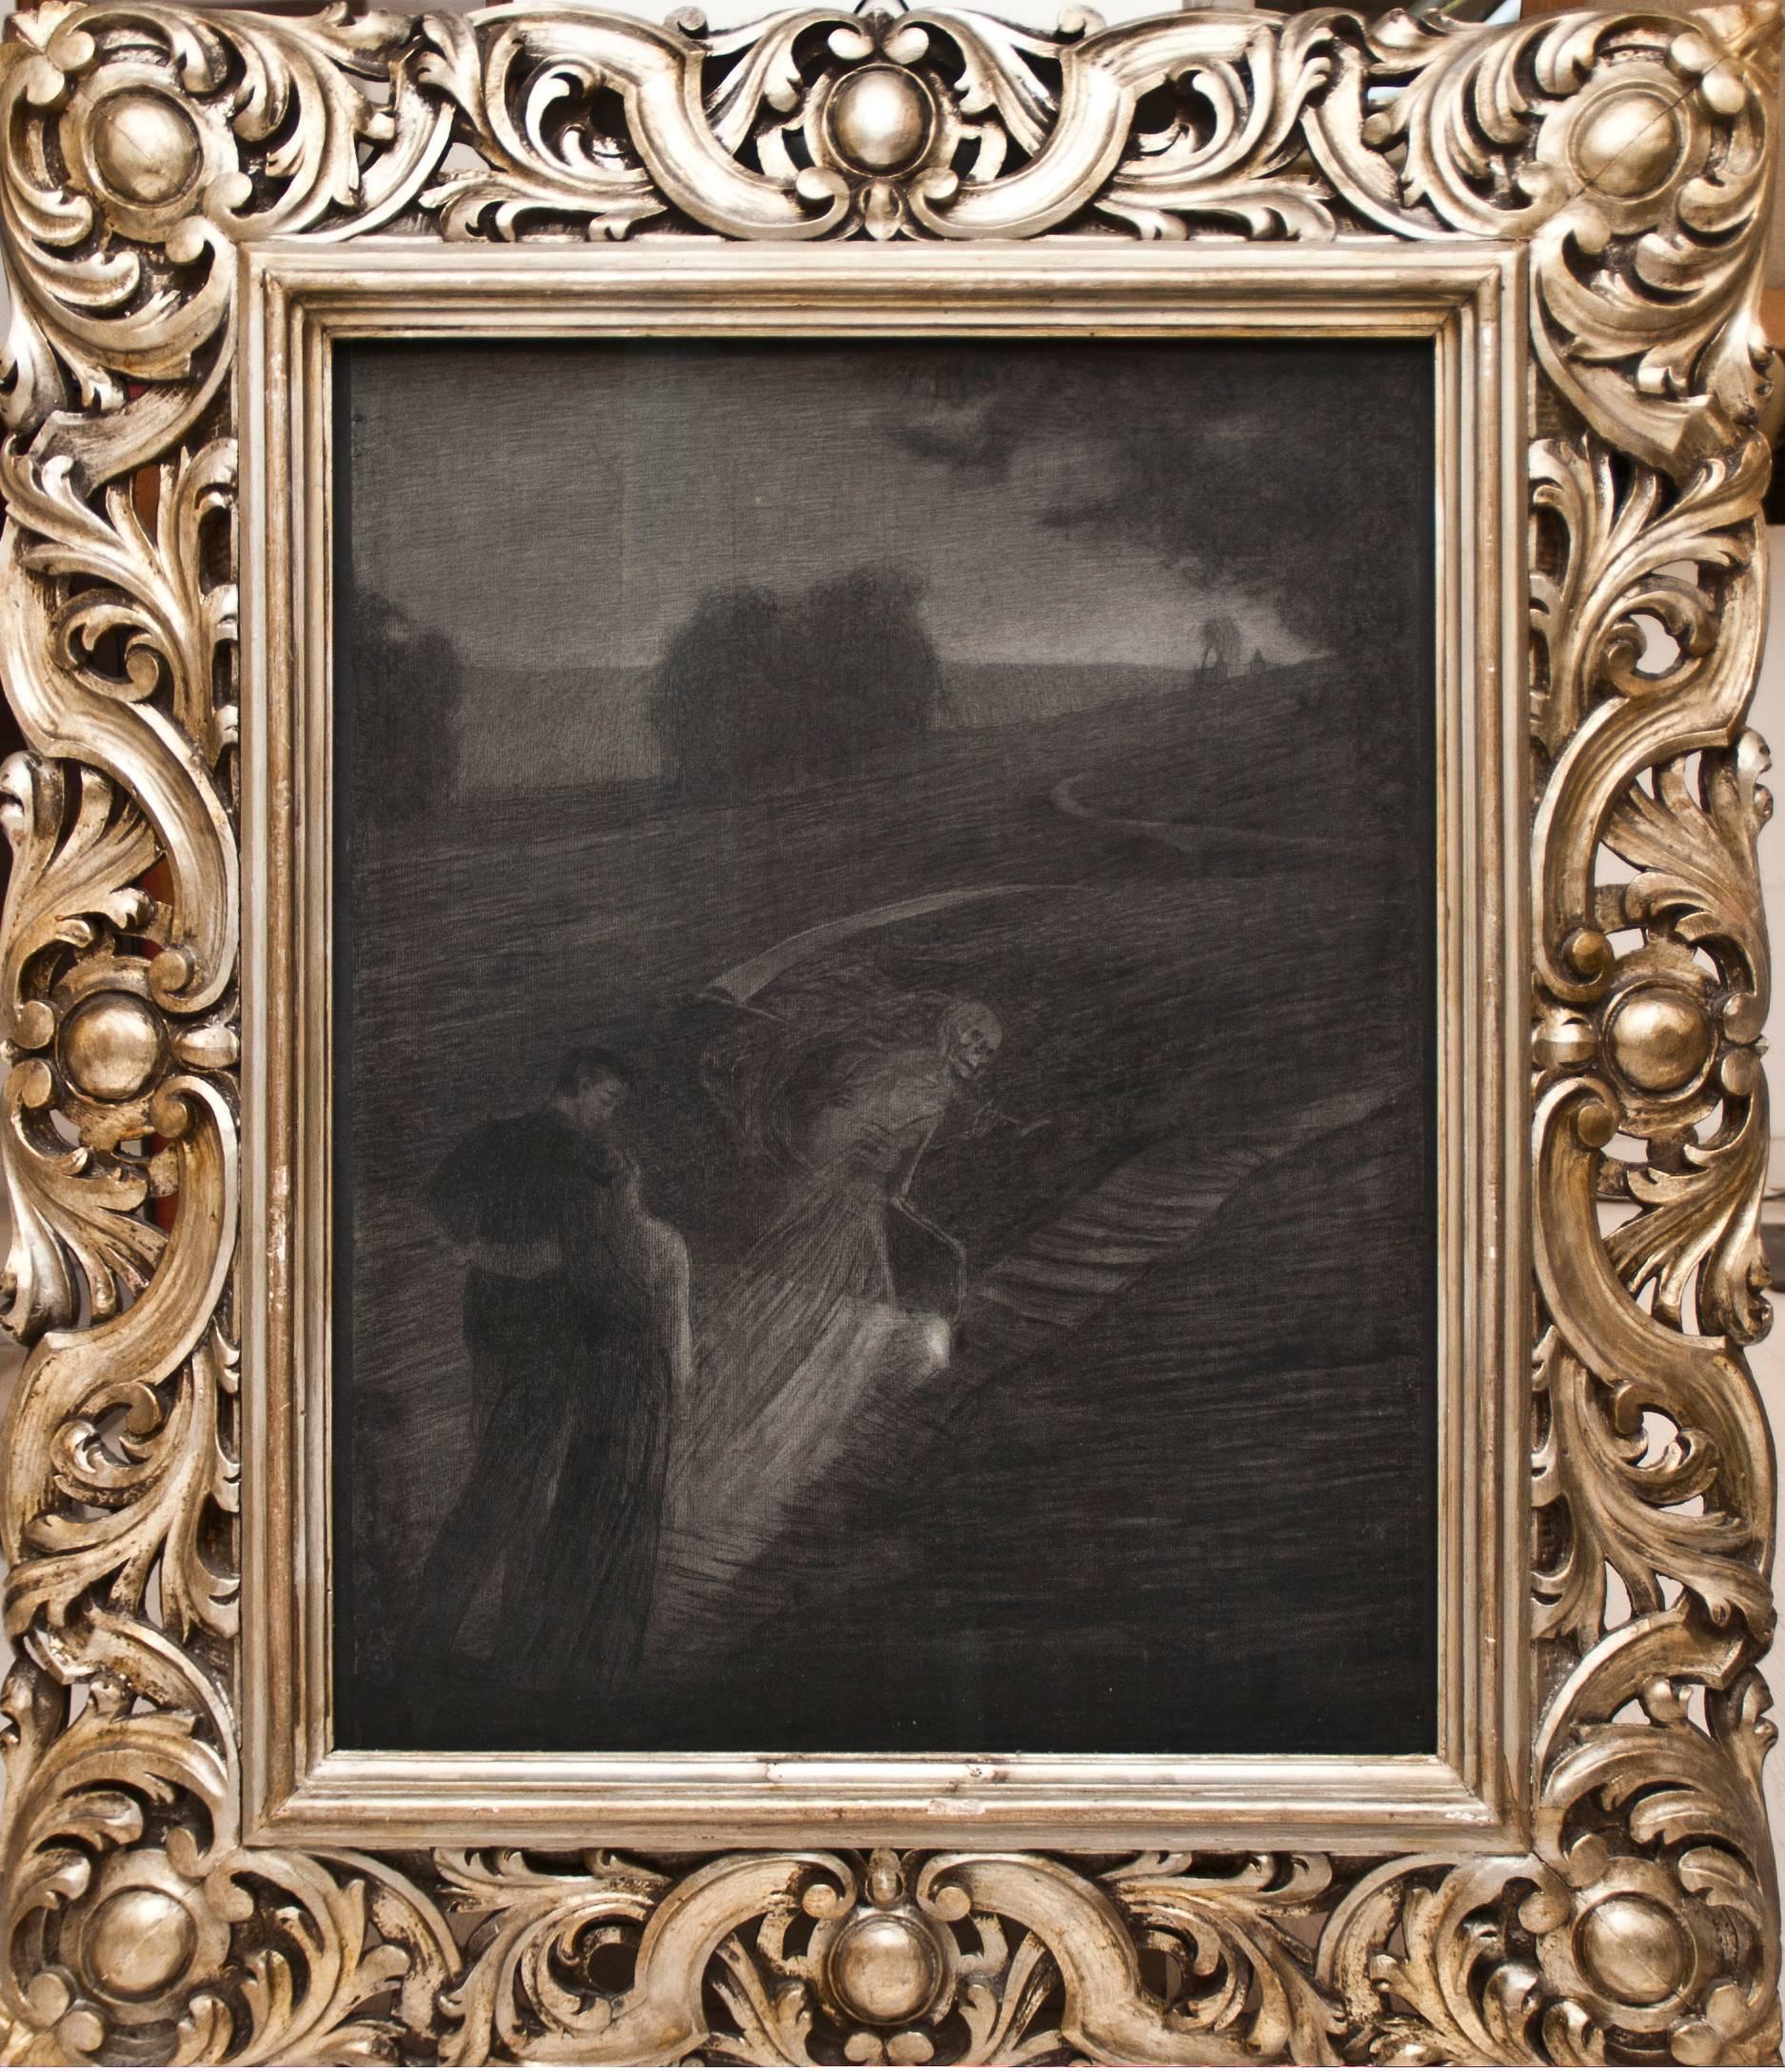 Charcoal drawing,1904. Dimensions: 62 x 50 cm

Provenance: Galleria d’Arte Moderna Alberto Grubicy, Milan.

A number of symbolist drawings done by Fornara in 1902 are known, including: La casa del poeta (The poet’s house), Sogno di una notte di